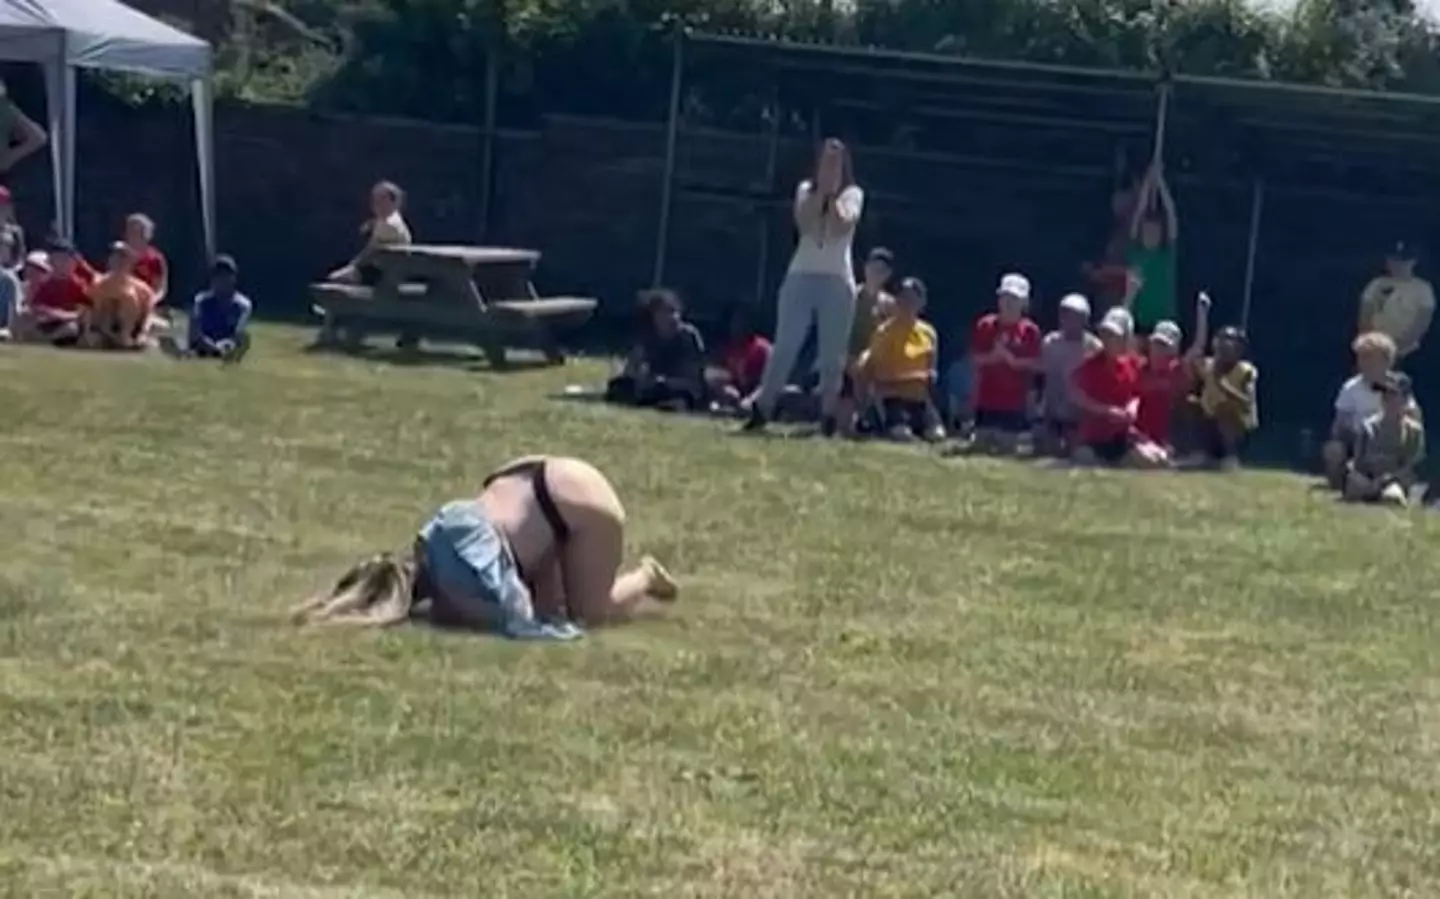 A mum who accidentally mooned the crowd on her child’s sports day says she’s had over 500 messages from men.